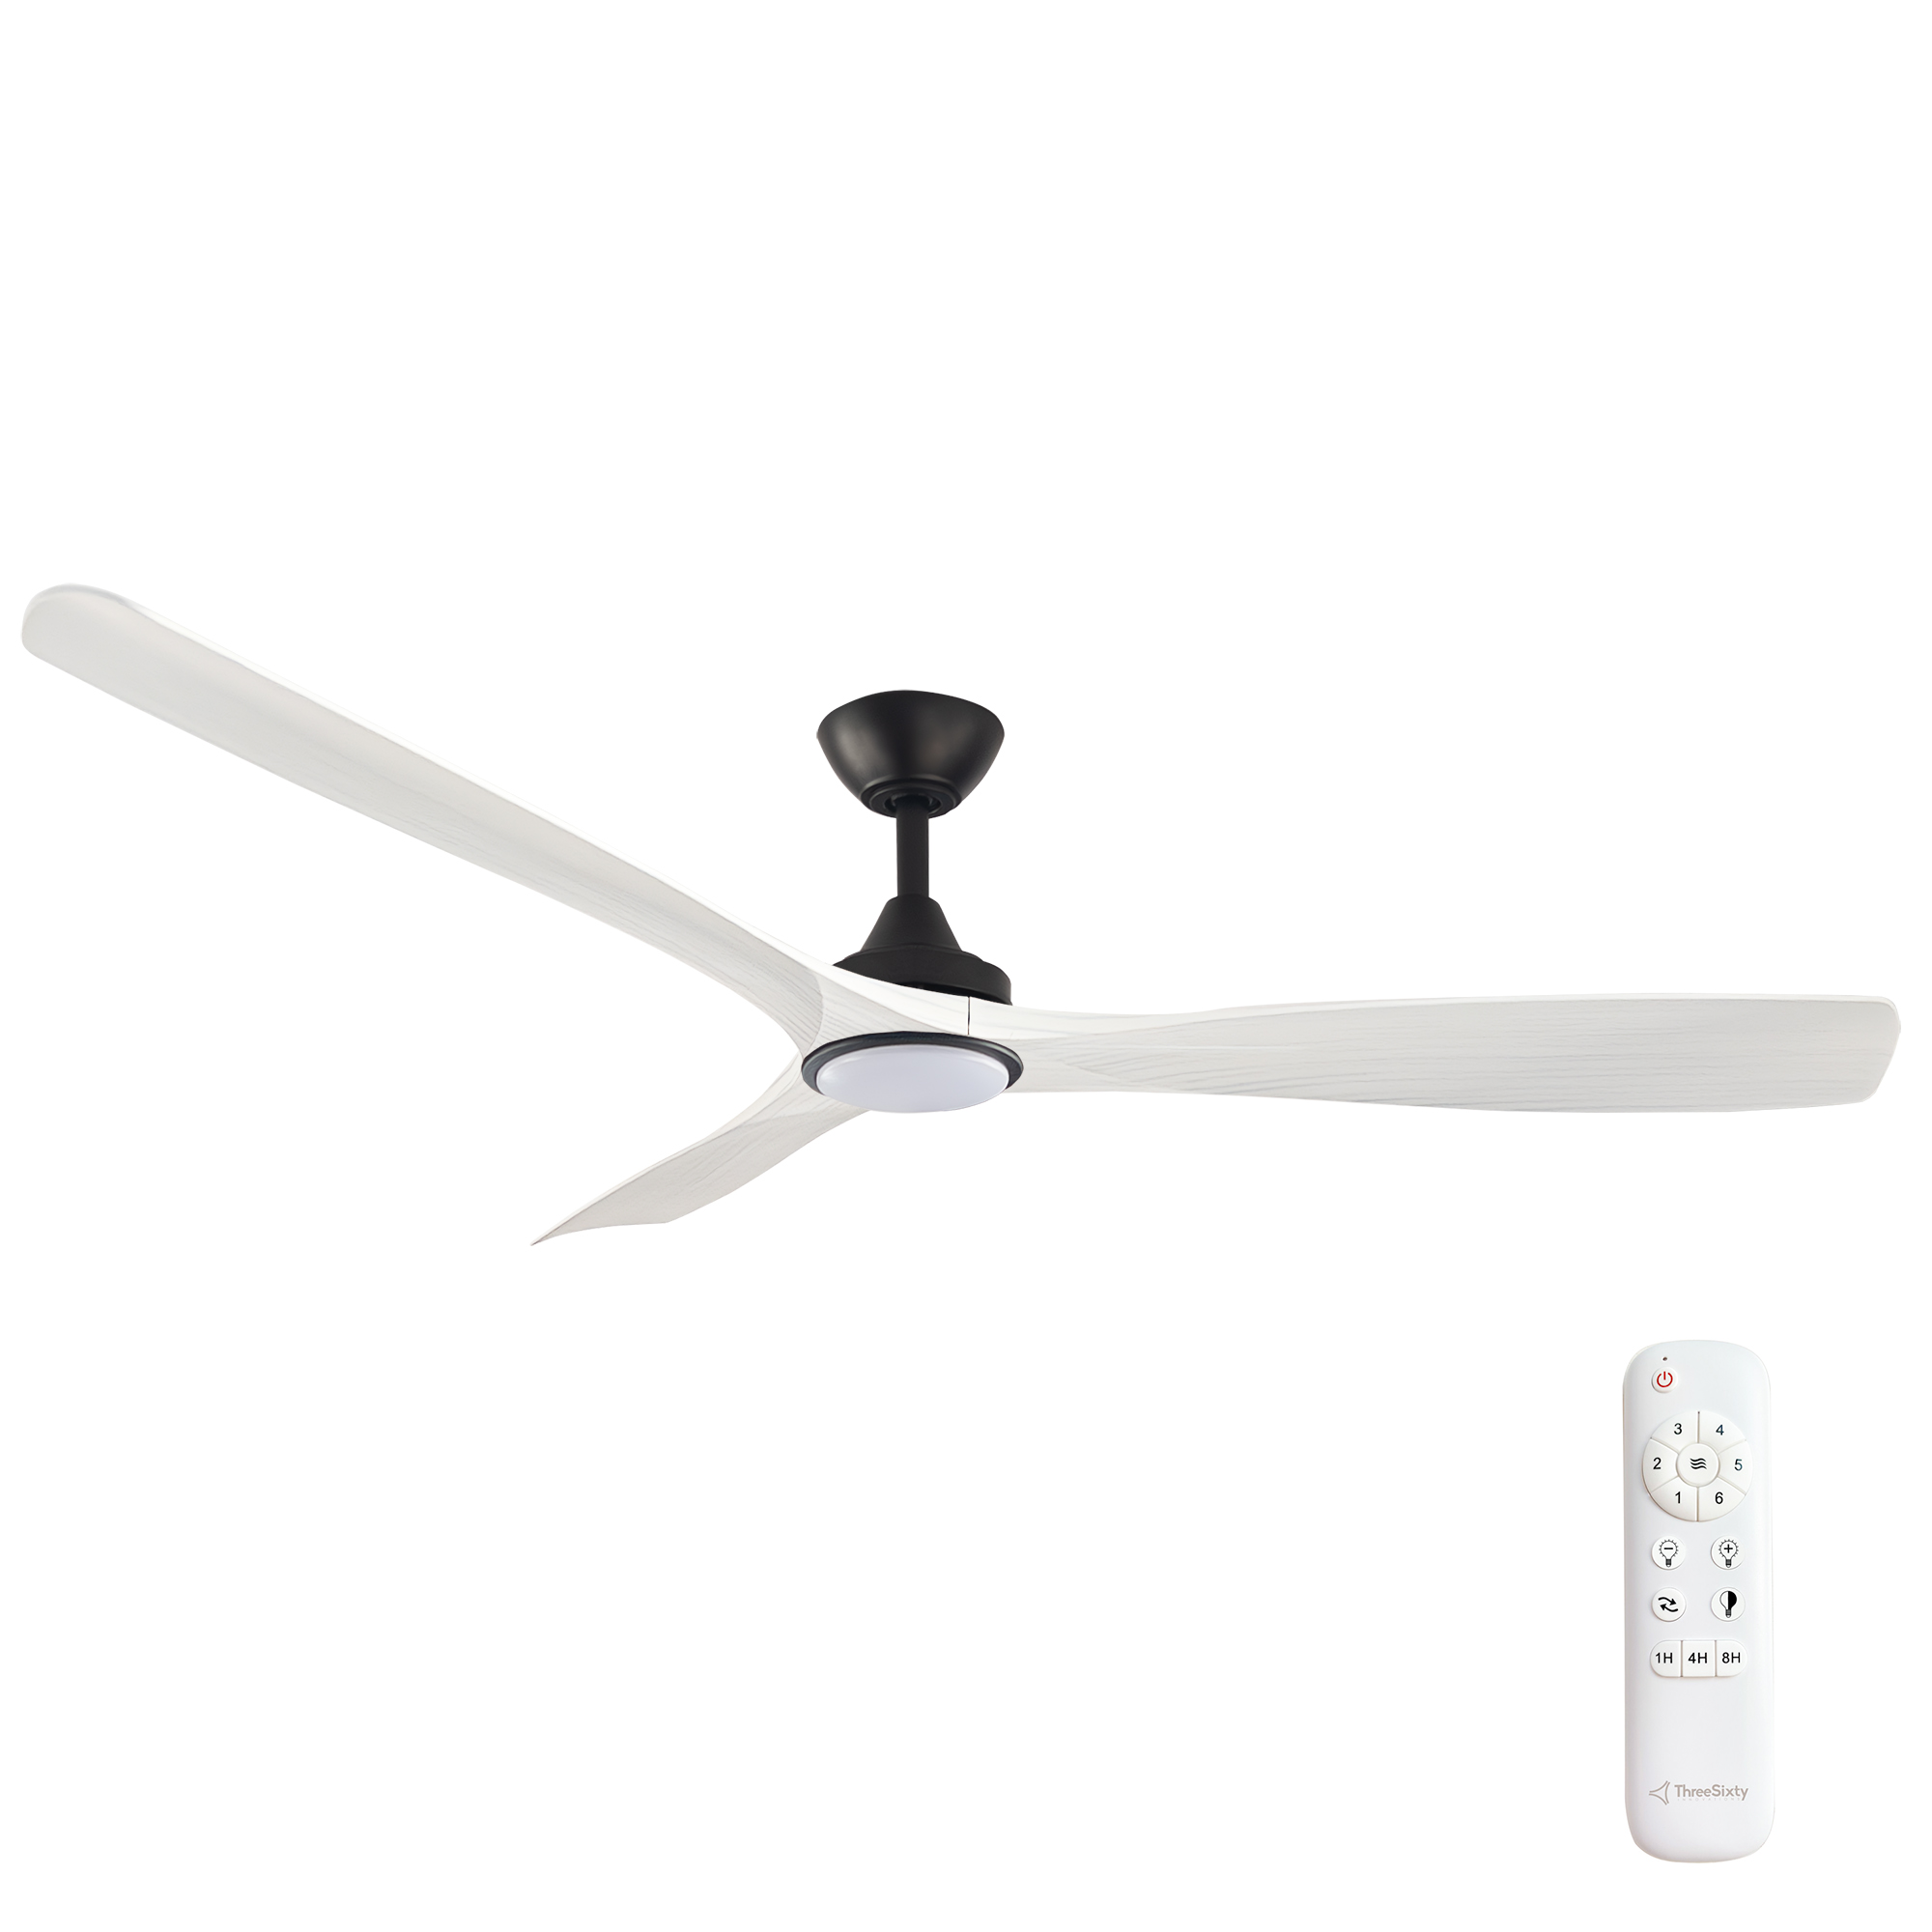 60" Spitfire DC Ceiling Fan in Black with White Wash blades and 18W CCT LED Light